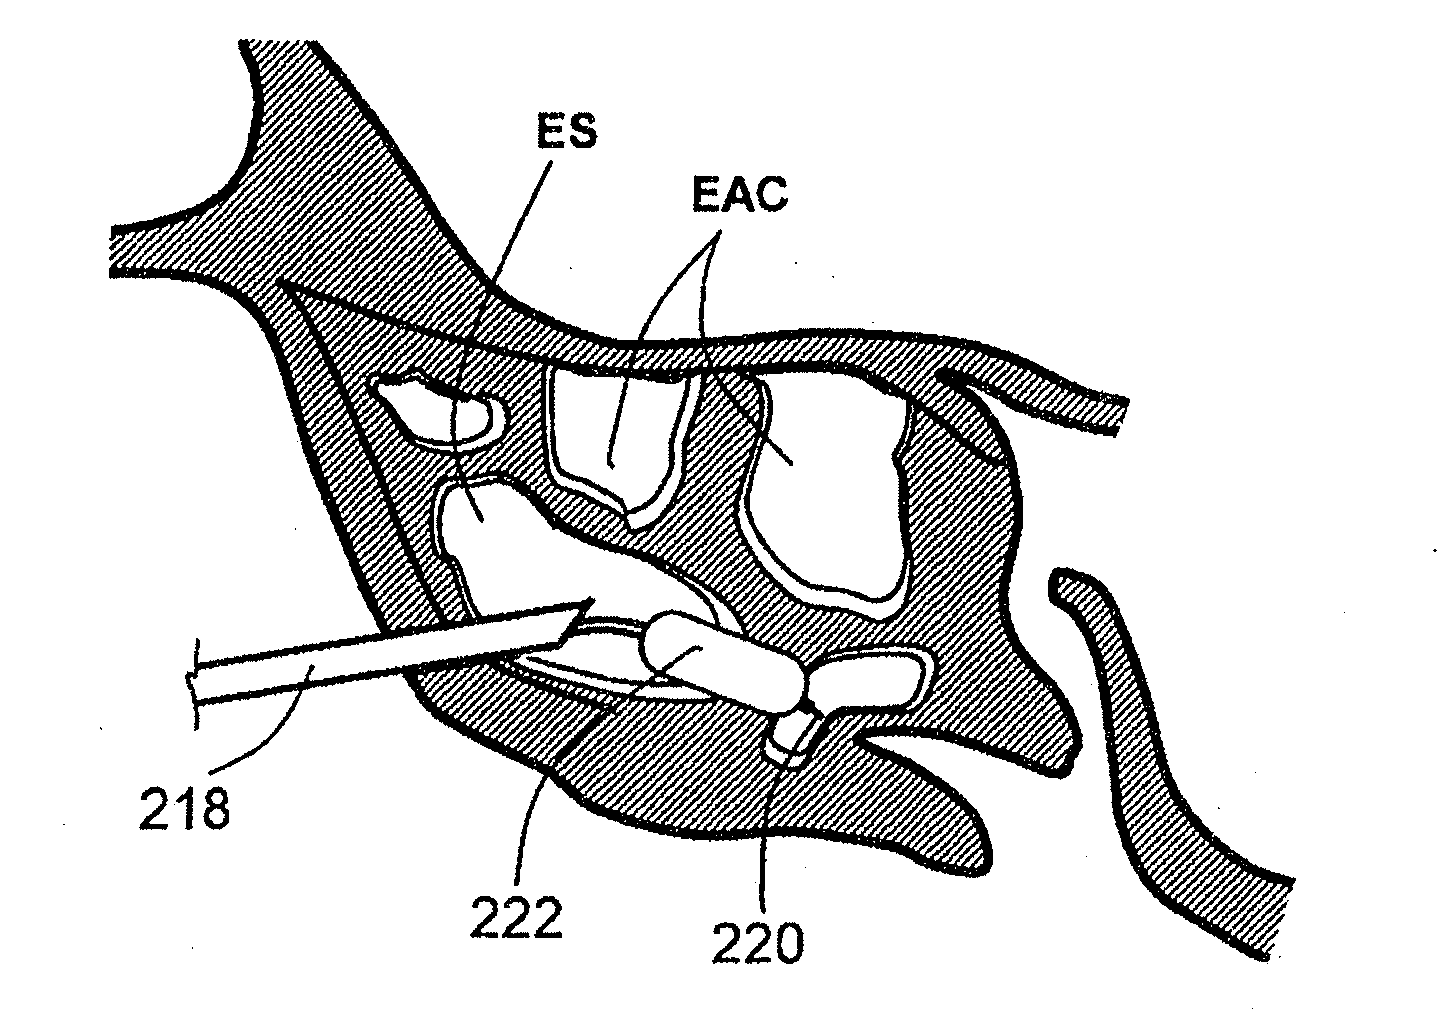 Apparatus and Methods for Dilating and Modifying Ostia of Paranasal Sinuses and Other Intranasal or Paranasal Structures